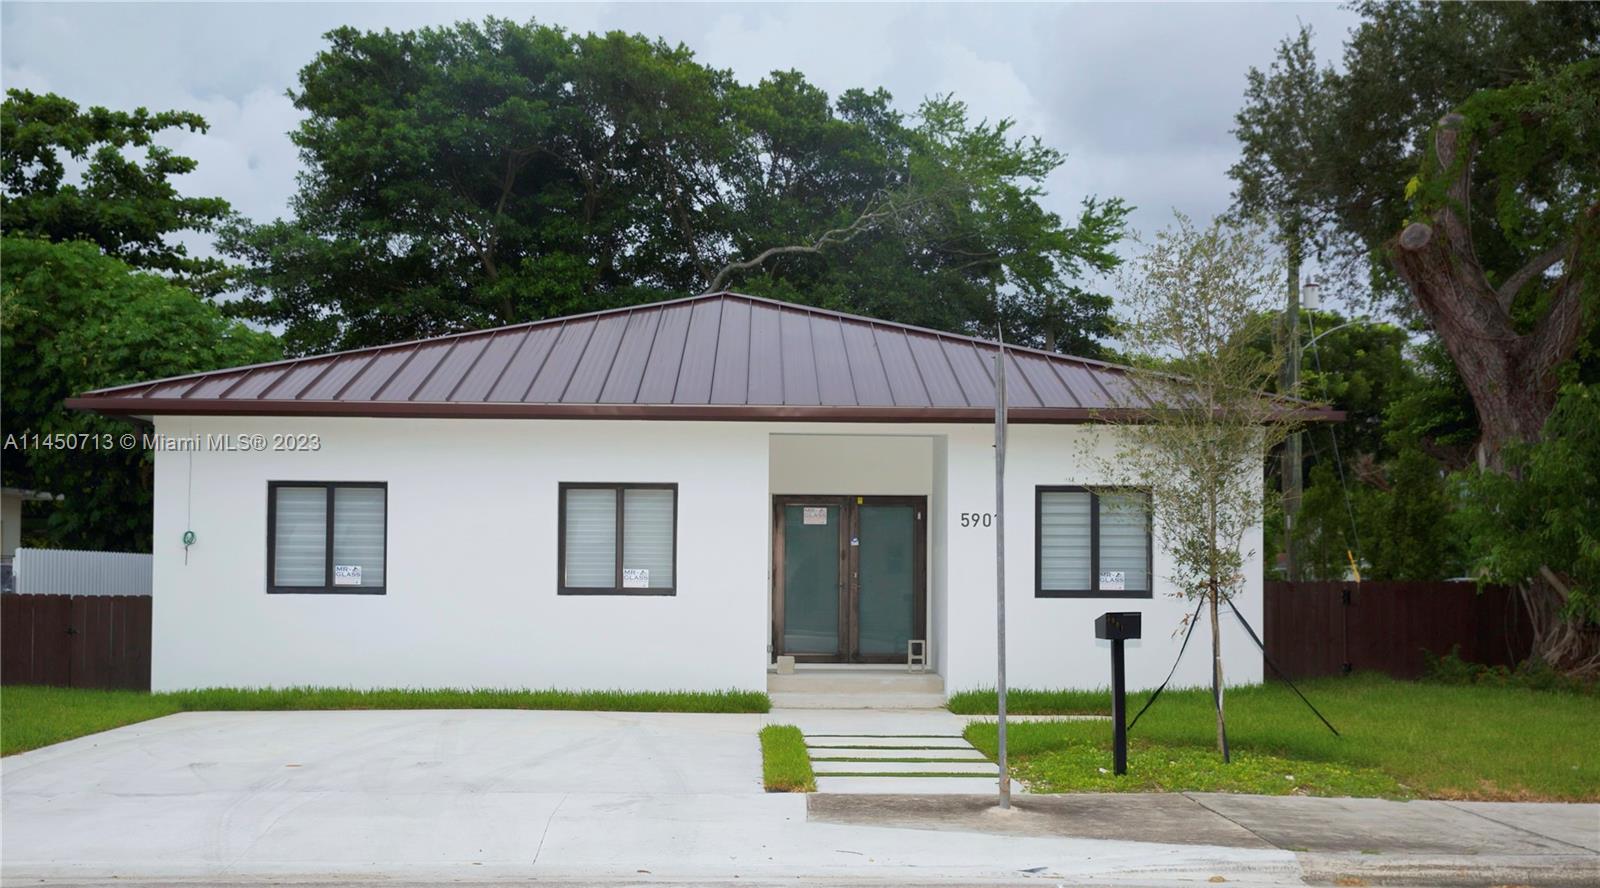 This lovely new-construction home nestled in the heart of South Miami was built to provide comfort and elegance to anyone who has the pleasure of calling the residence home. Featuring 5 large bedrooms and 3 modern bathrooms, this home is spacious to allow for comfortable family living. The kitchen is outfitted with top-of-the-line appliances and boasts a large island. With a custom walk-in pantry, there will be no lack of space for storage. The property's large corner lot provides outdoor entertainment space and will feature a large modern outdoor pool.

This residence is only a short commute from the prestigious University of Miami and is situated nearby top areas such as Brickell, Coral Gables, and Key Biscayne. All while still providing a quiet and tranquil environment.